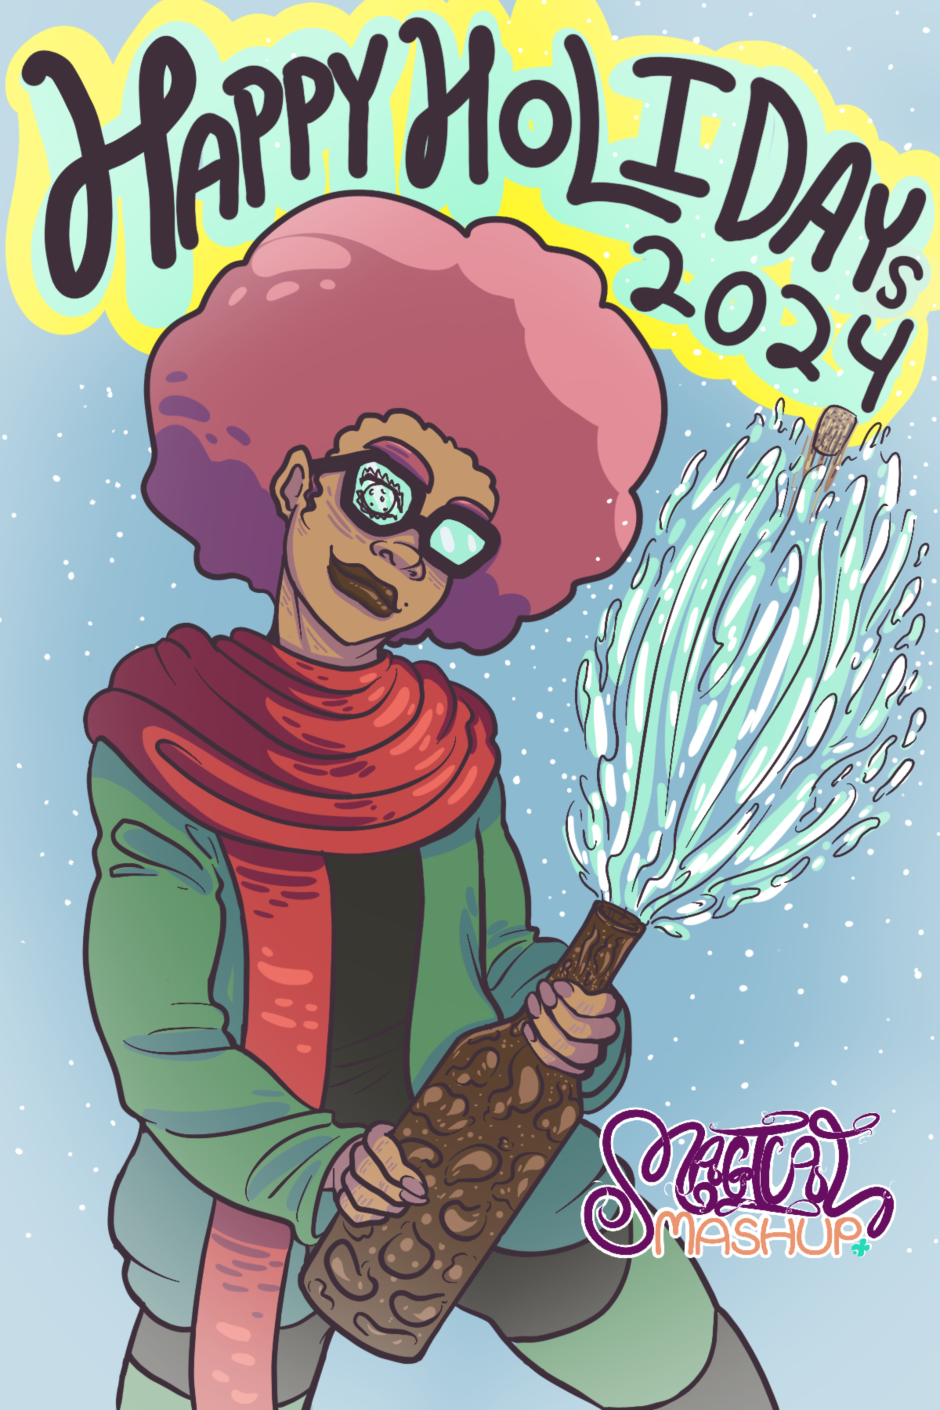 Arafo, an enchantor with large glasses and a giant magenta afro wearing a scarf popping a large bottle of bubbly.